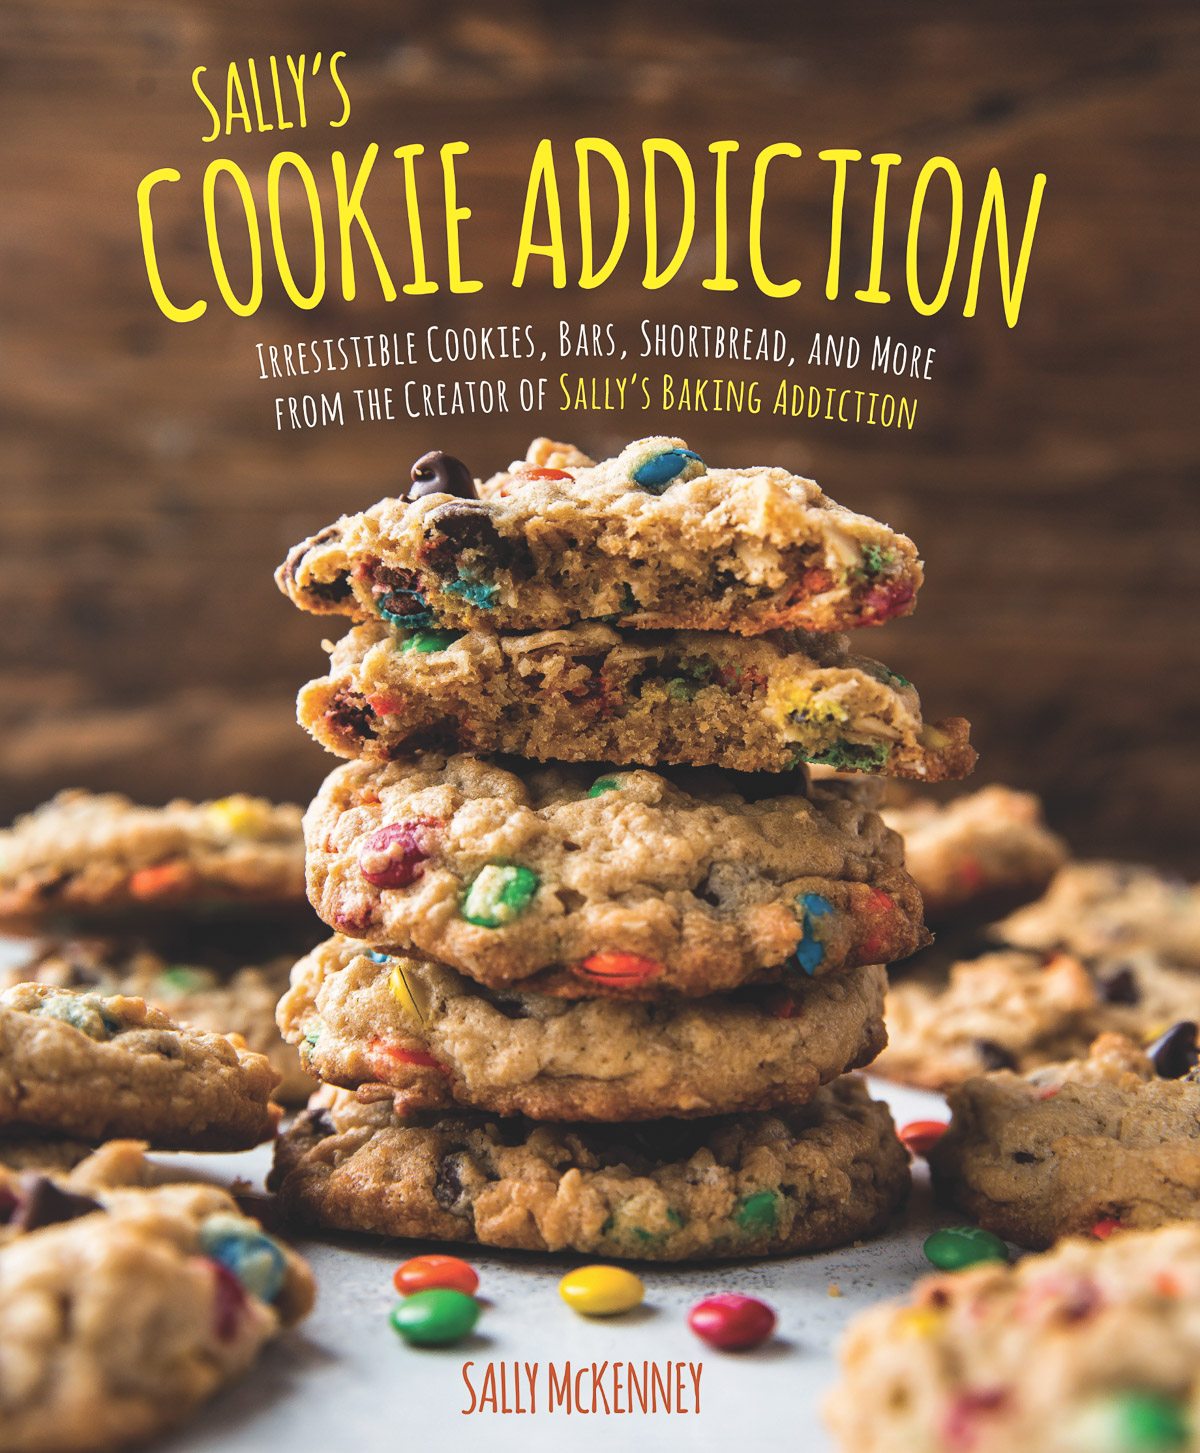 Happy 2nd Birthday Sally’s Cookie Addiction! (Giveaway)